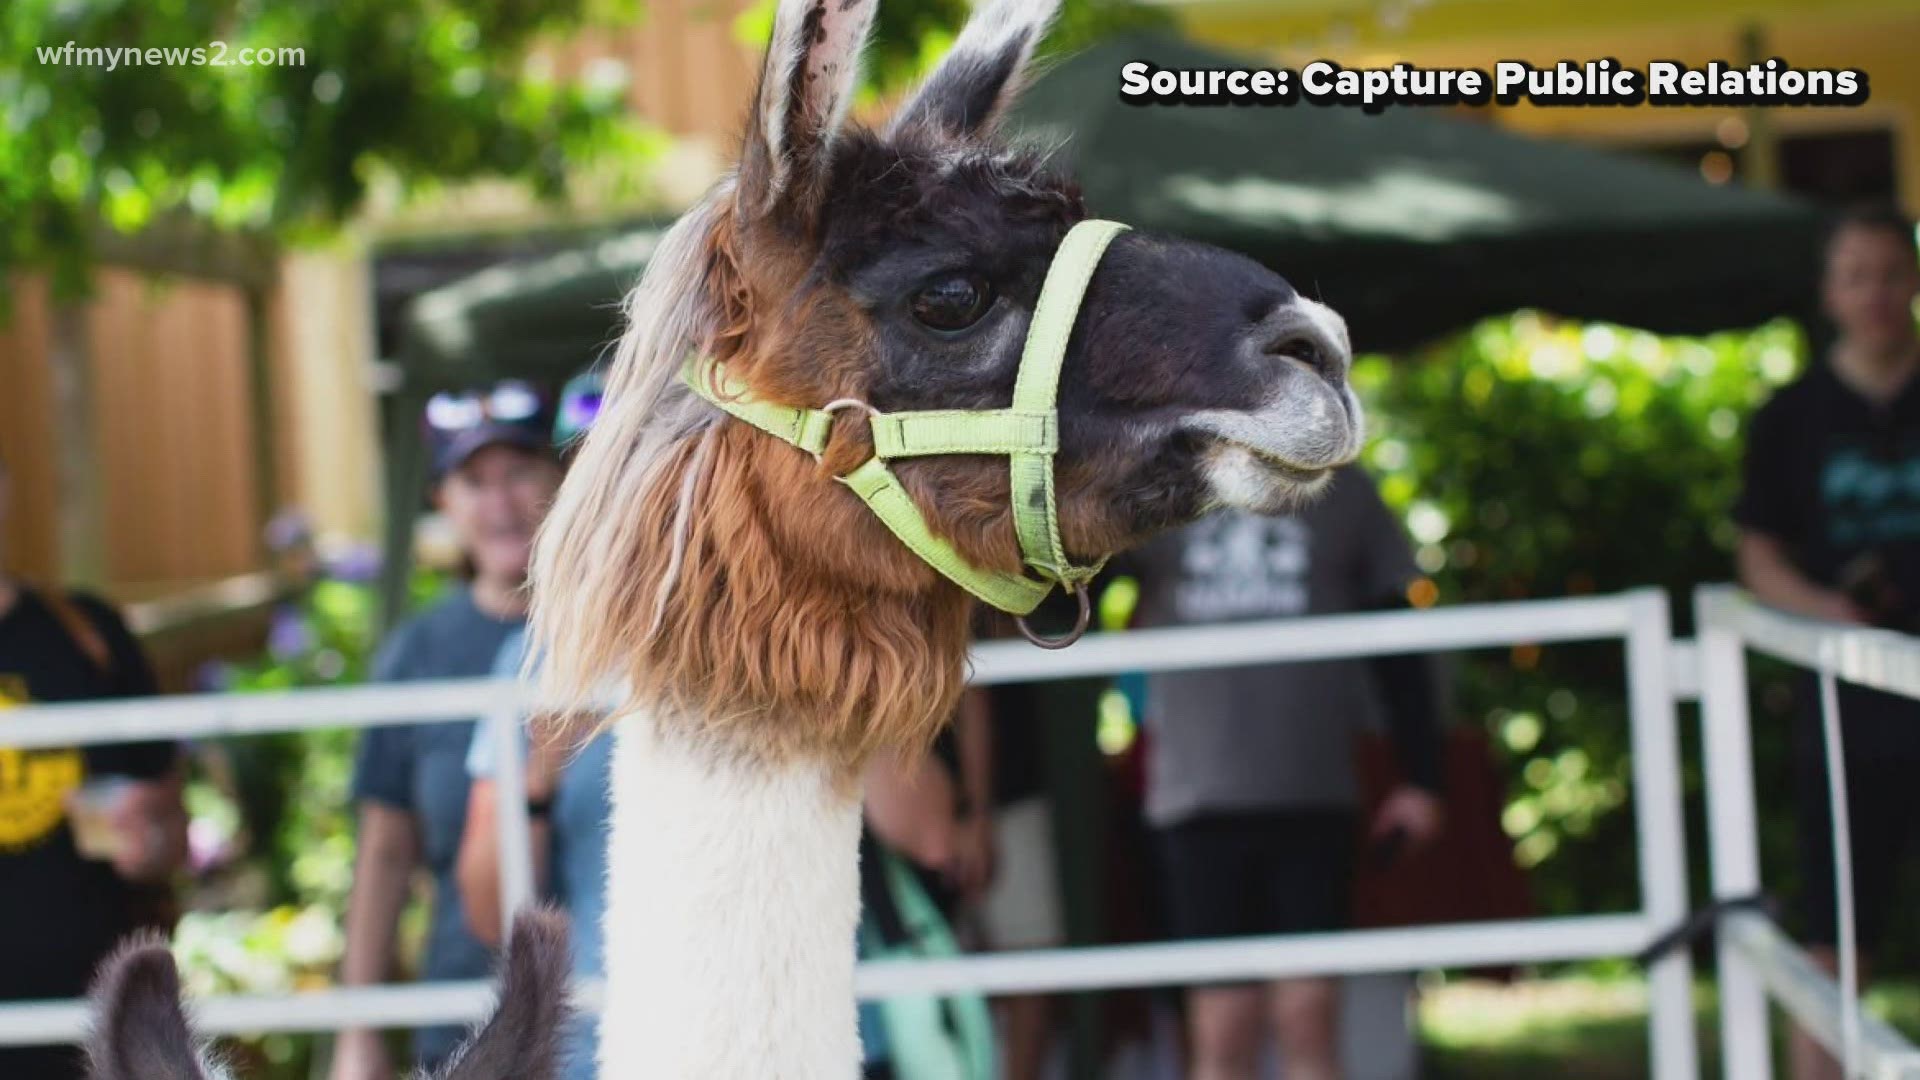 The Tour de Llama is a chance for cyclists to raise money to help provide food and shelter for the hungry and homeless.